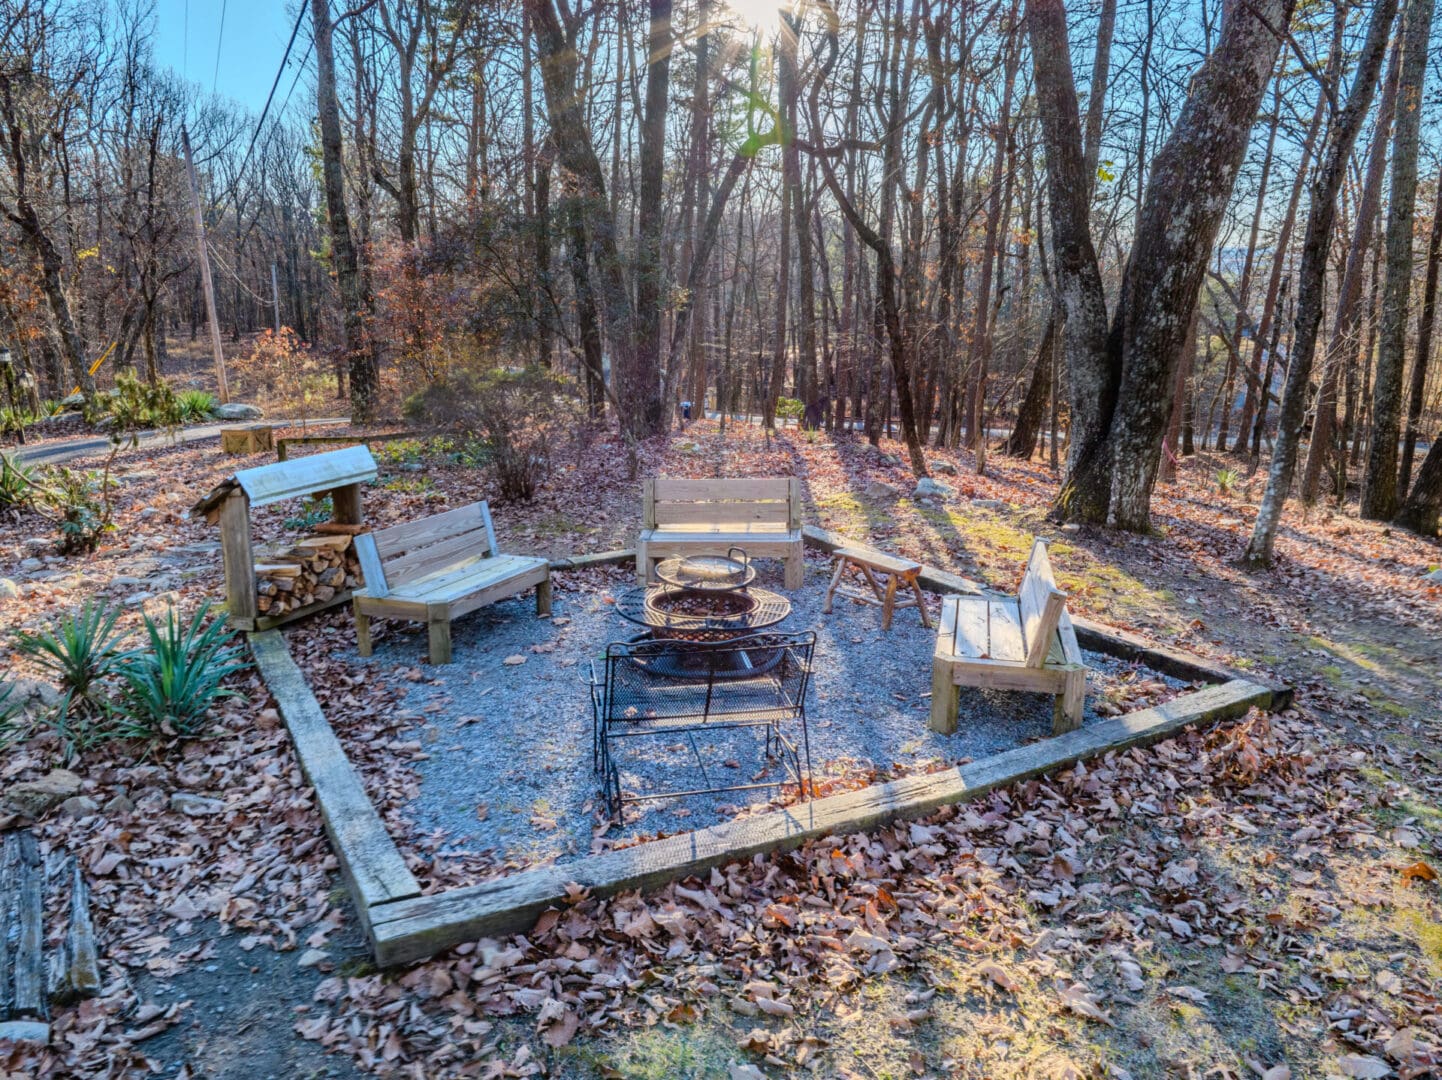 A tranquil fire pit nestled in the midst of a serene wooded area, offering the perfect ambiance for a peaceful vacation retreat.